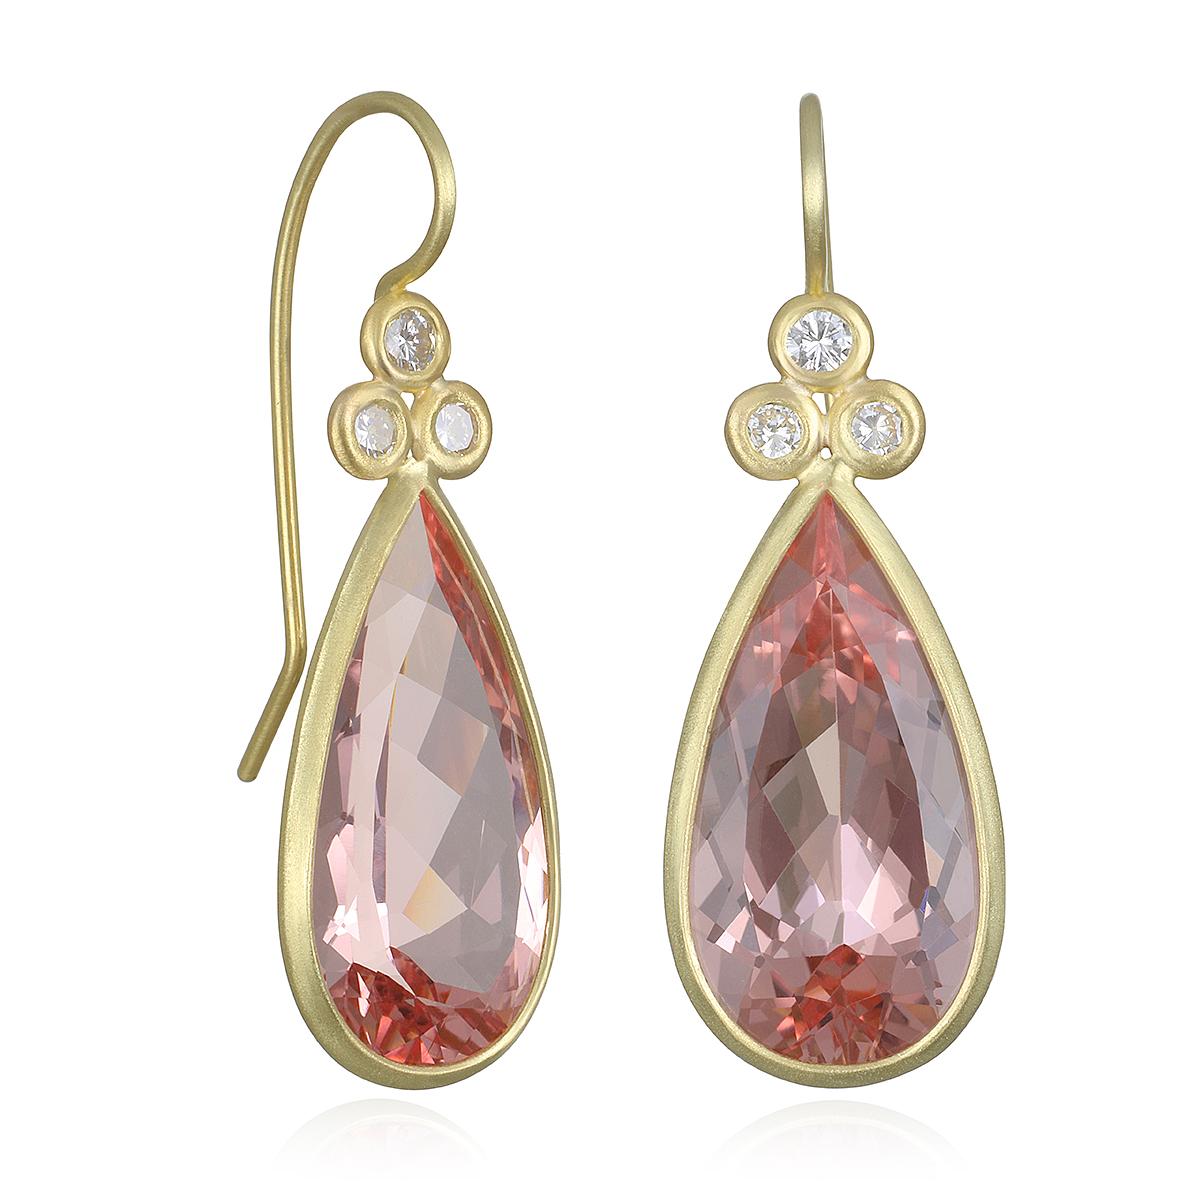 Perfectly matched in color and shape, faceted Morganite pear-shaped drops sparkle in just the right shade of a sophisticated Pink.  Triple diamond accents. Morganite is a variety of 